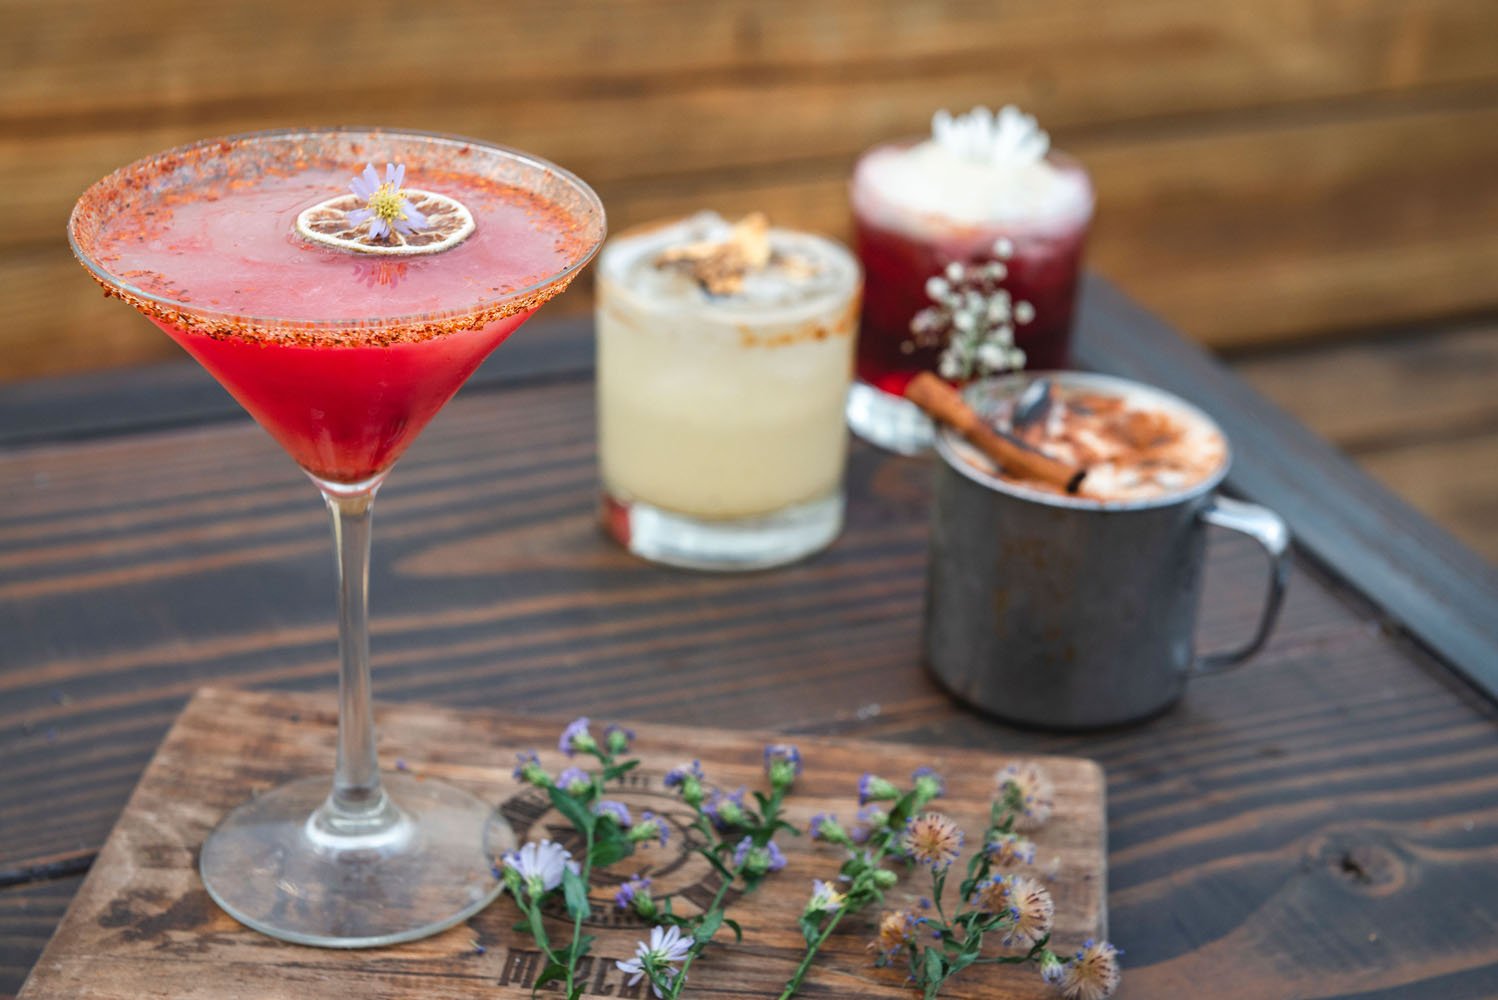 A variety of four cocktails on a wooden table, including a margarita, a moscow mule, and berry-flavored drinks, garnished with flowers and spices.